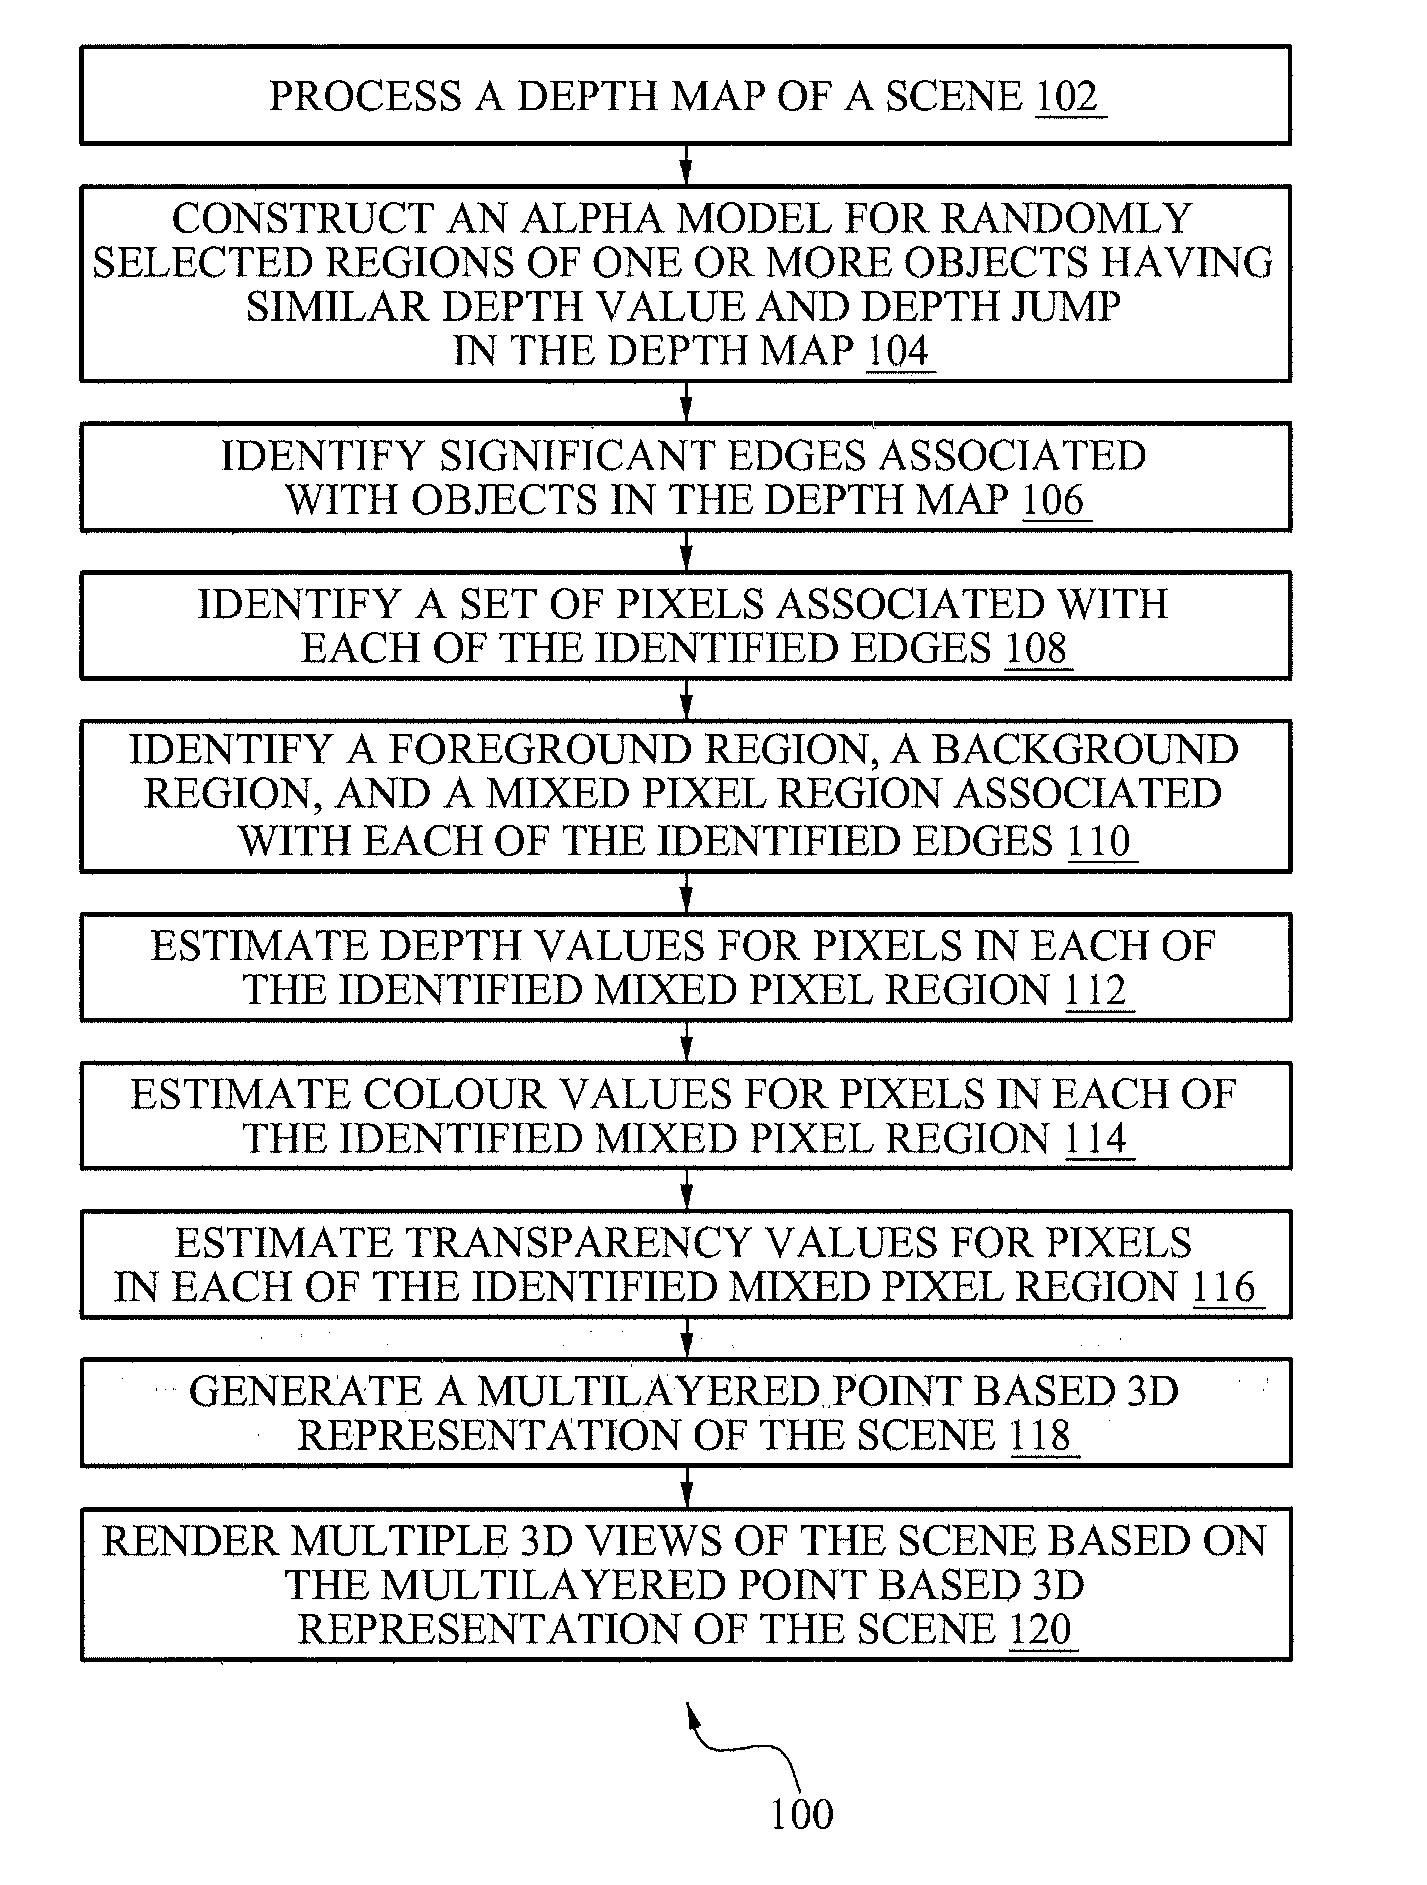 Method and system for rendering three dimensional views of a scene